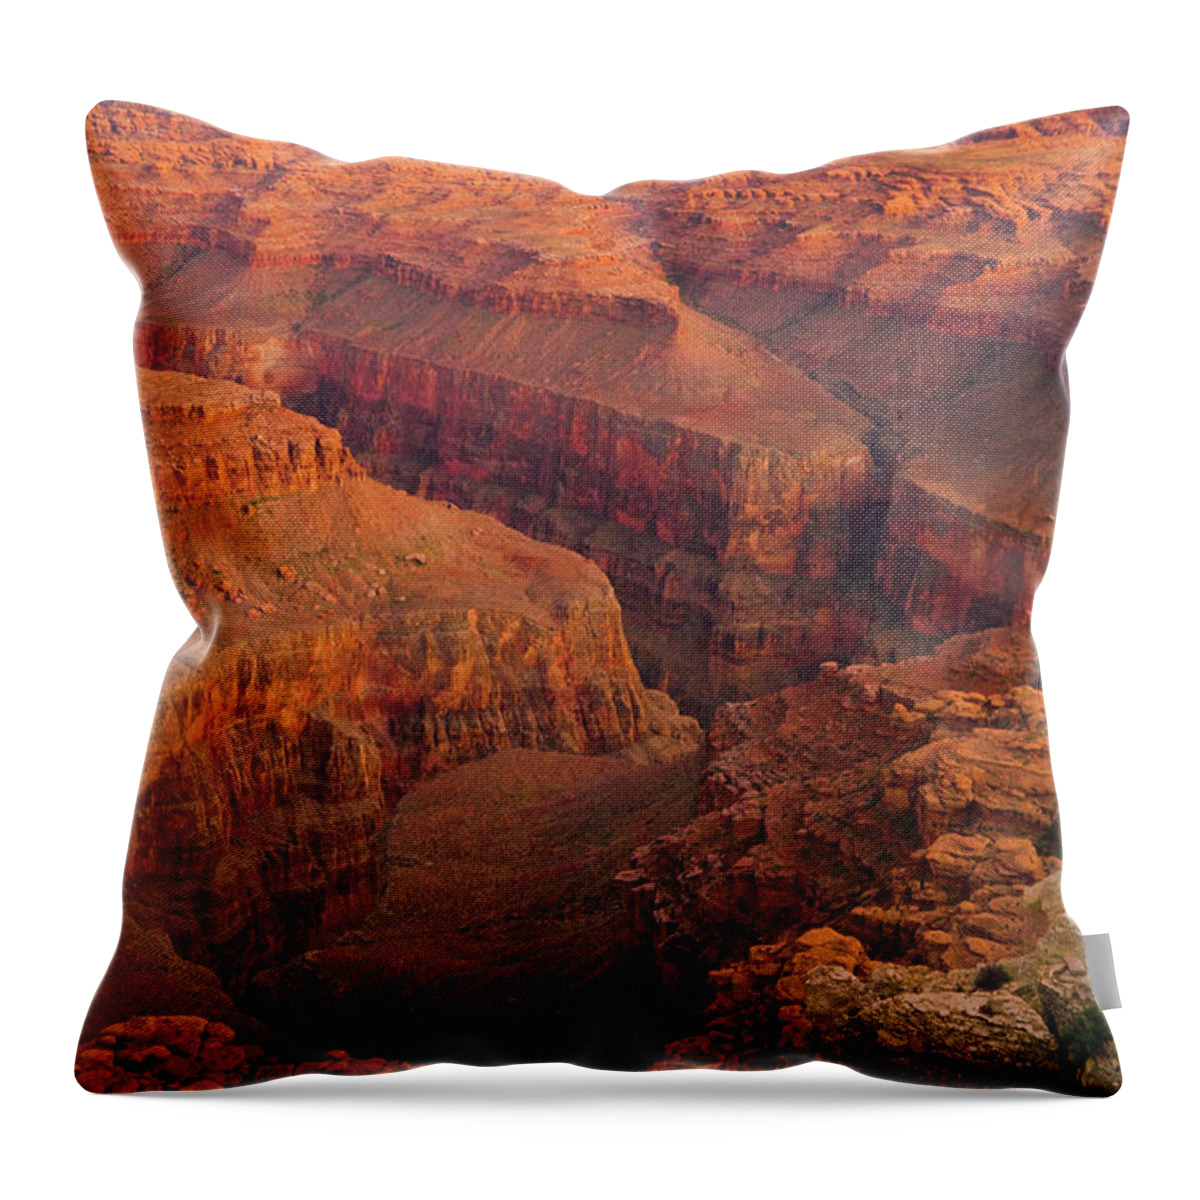 00345503 Throw Pillow featuring the photograph Grand Canyon from Kanab Point by Yva Momatiuk John Eastcott